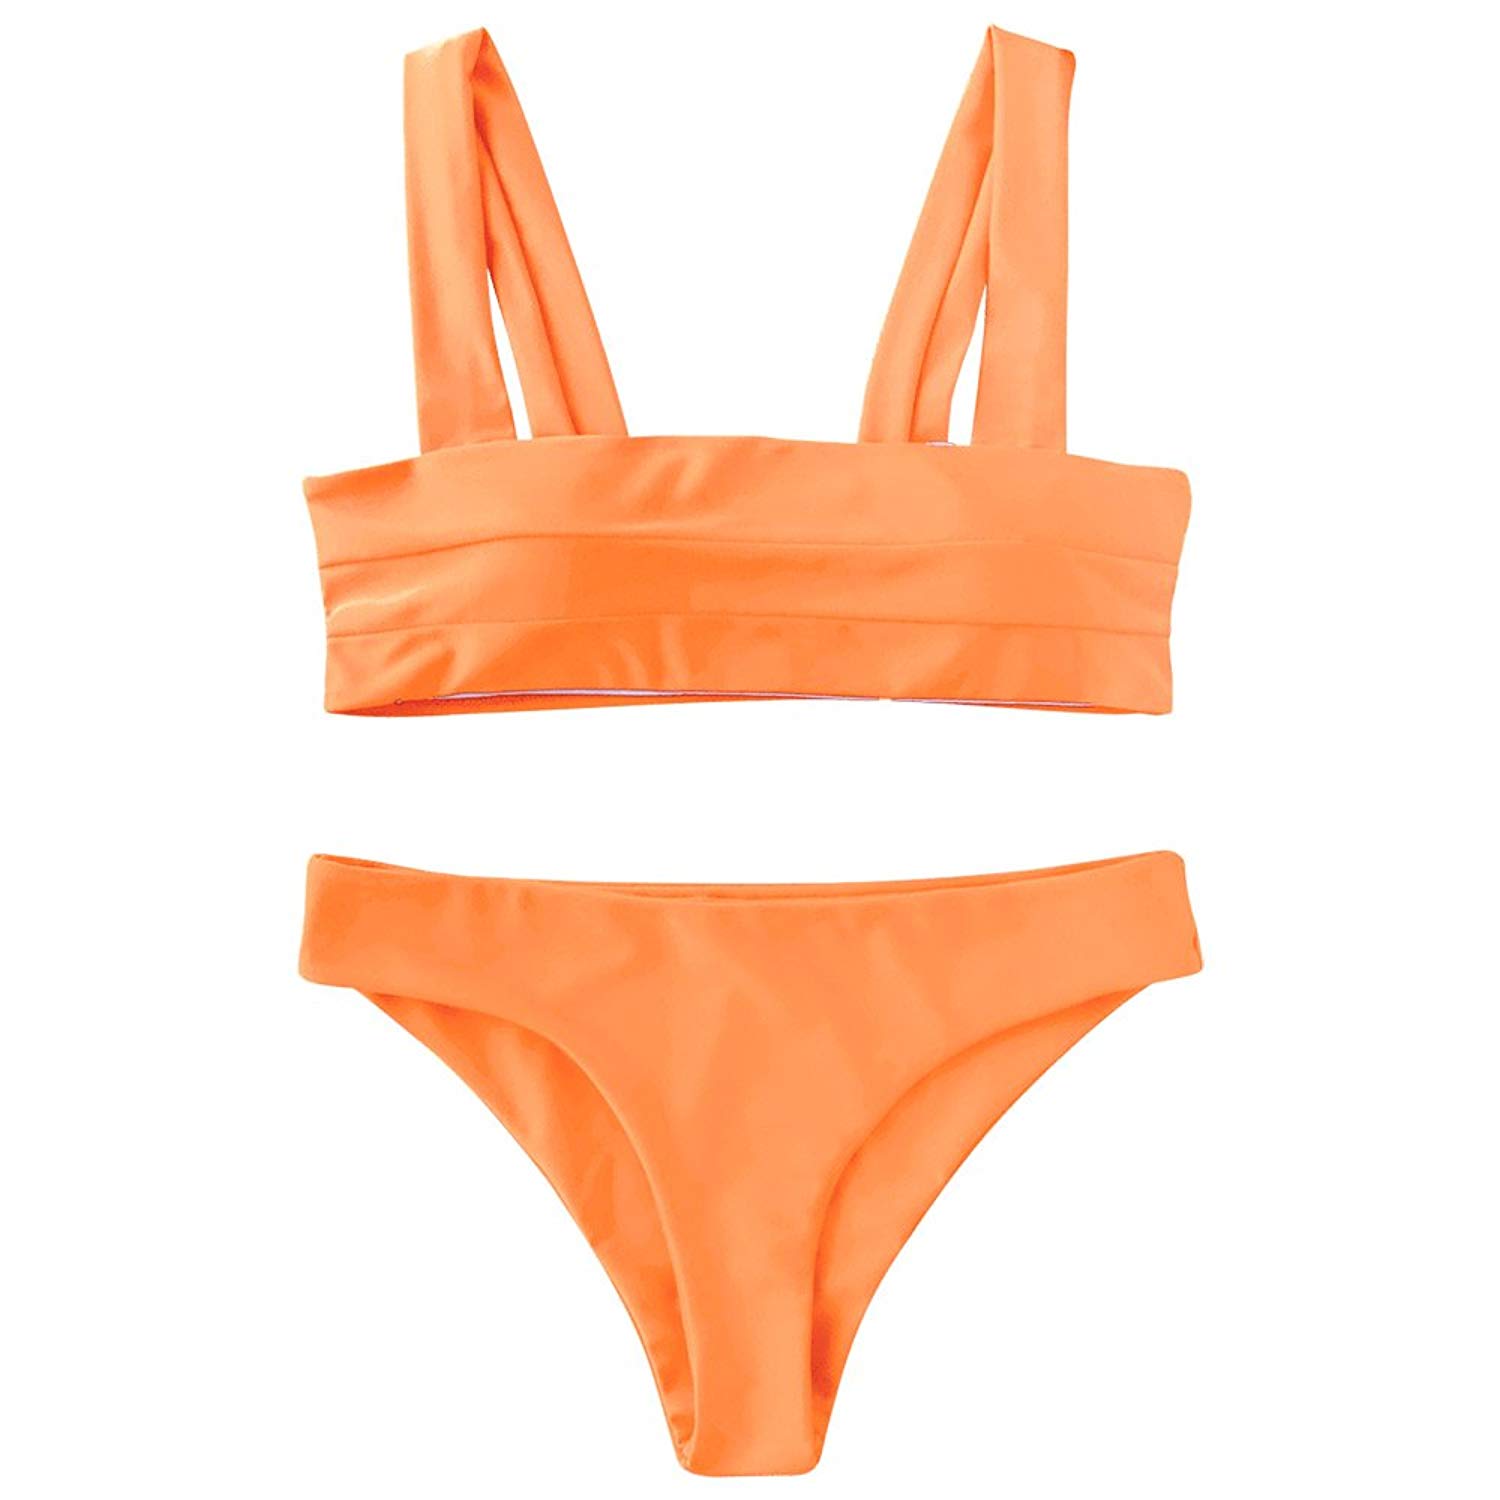 4 Amazon Swimsuit Trends You Can Shop for Under $30 | Who What Wear UK